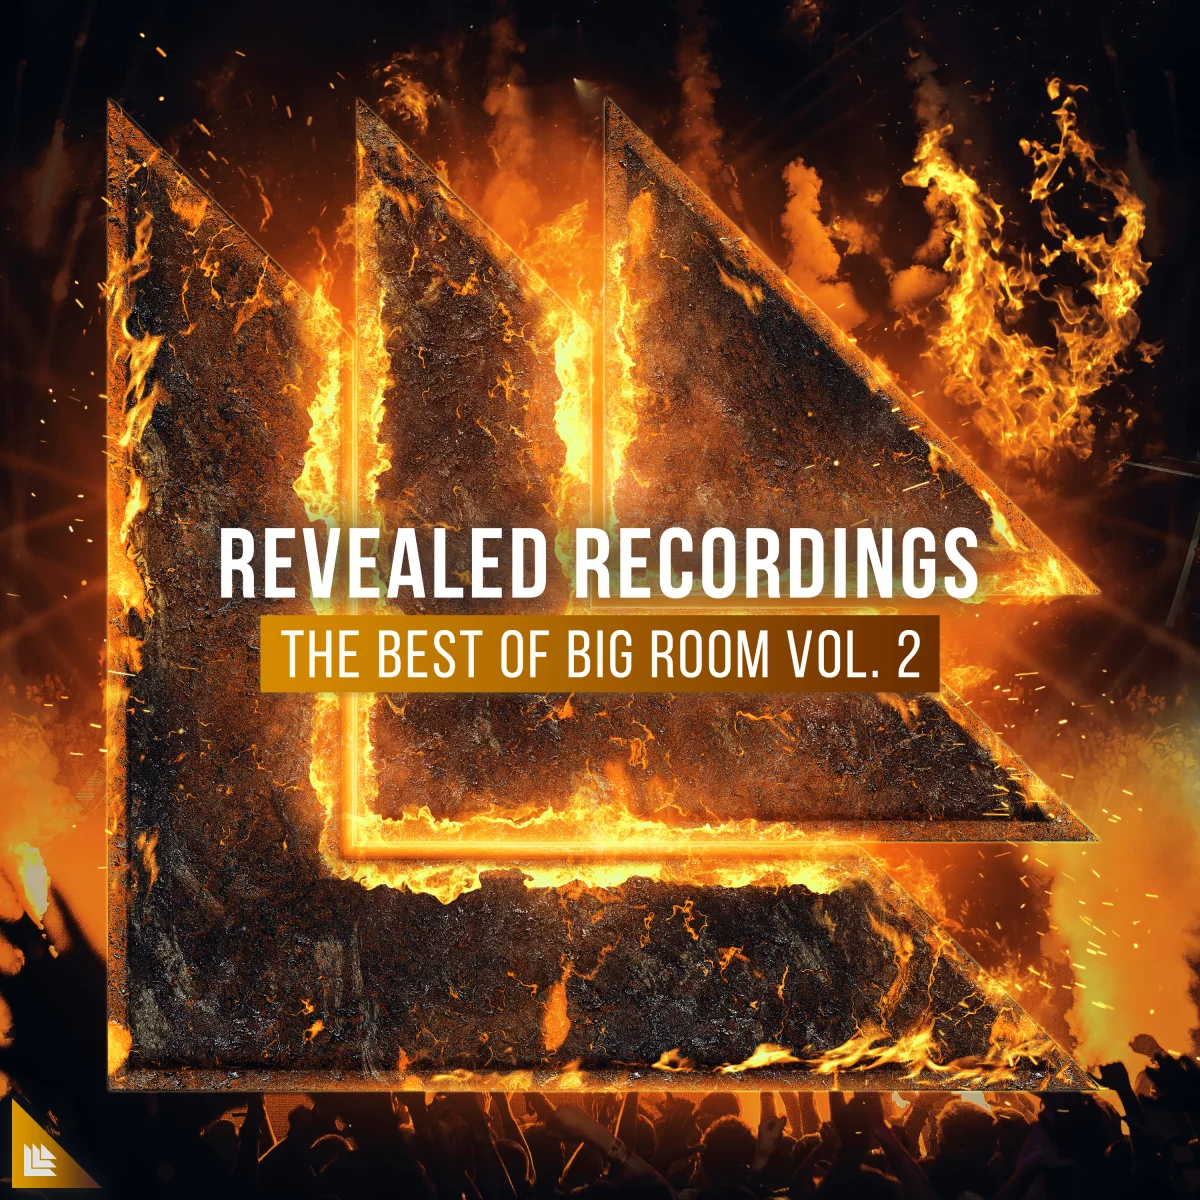 Revealed Recordings presents The Best of Big Room Vol. 2 - Revealed Recordings